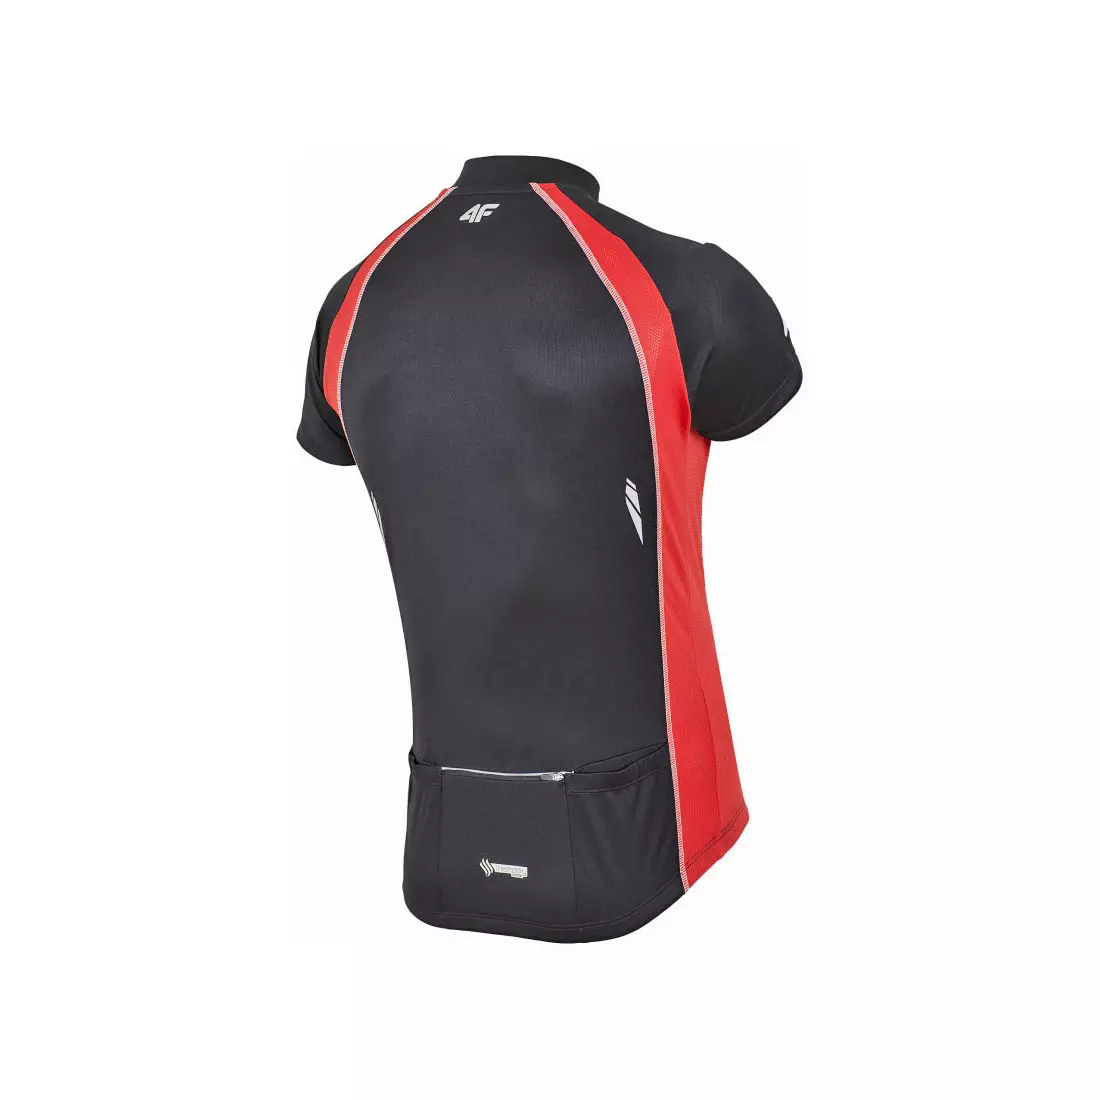 4F men's cycling jersey RKM002-black and red